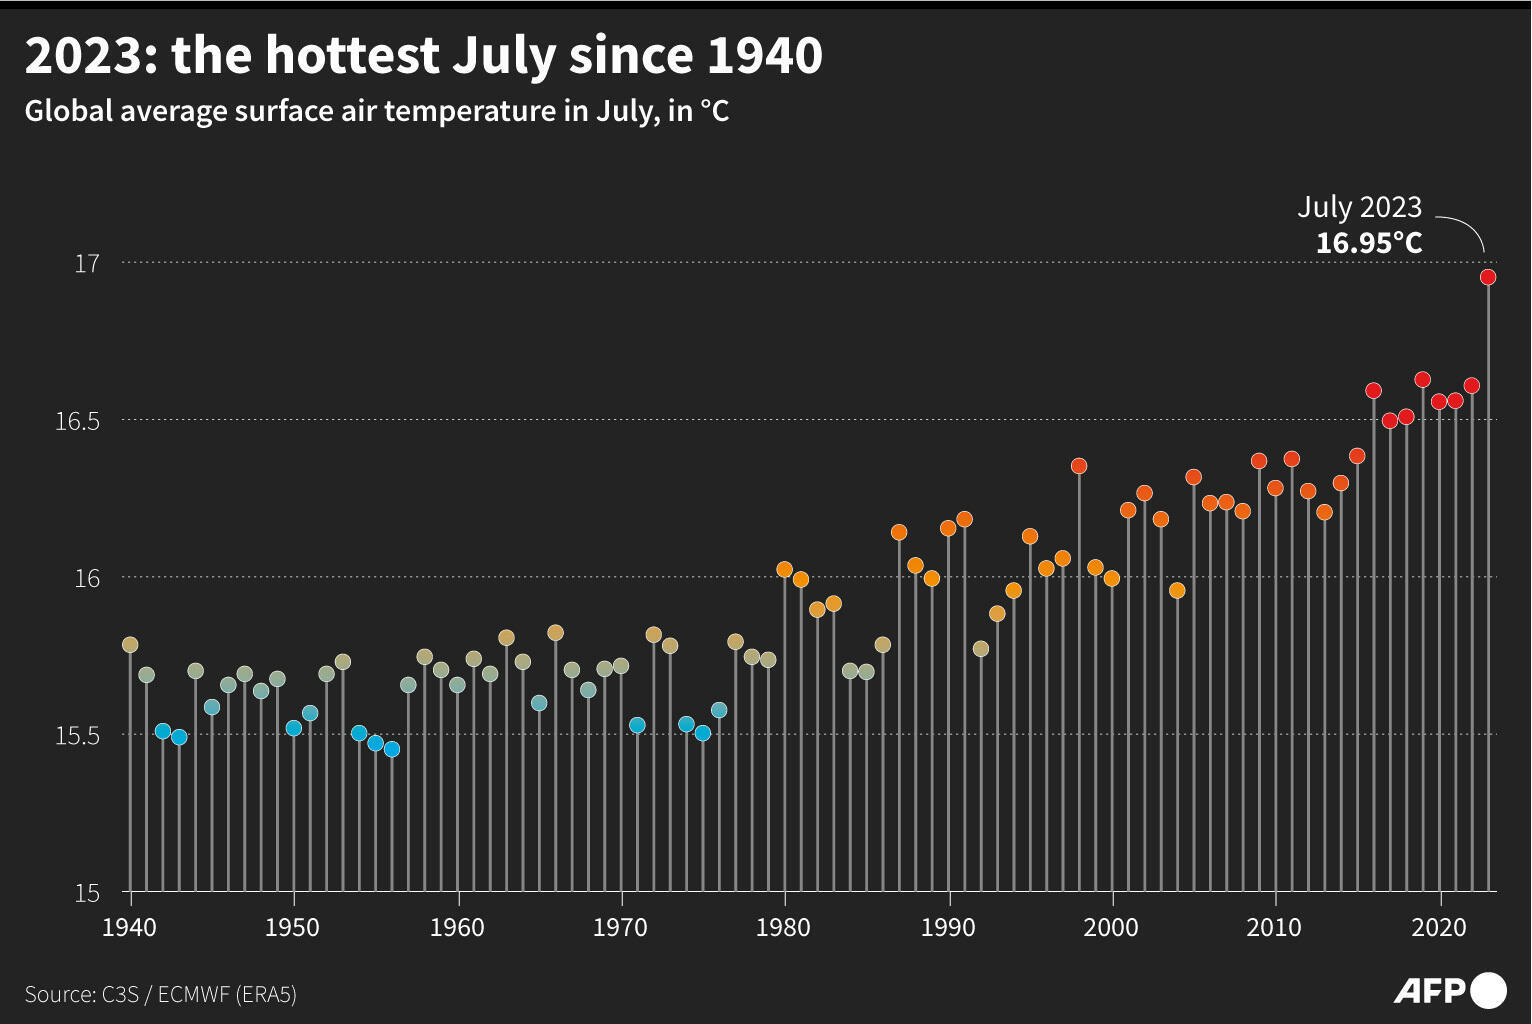 2023: the hottest July since 1940